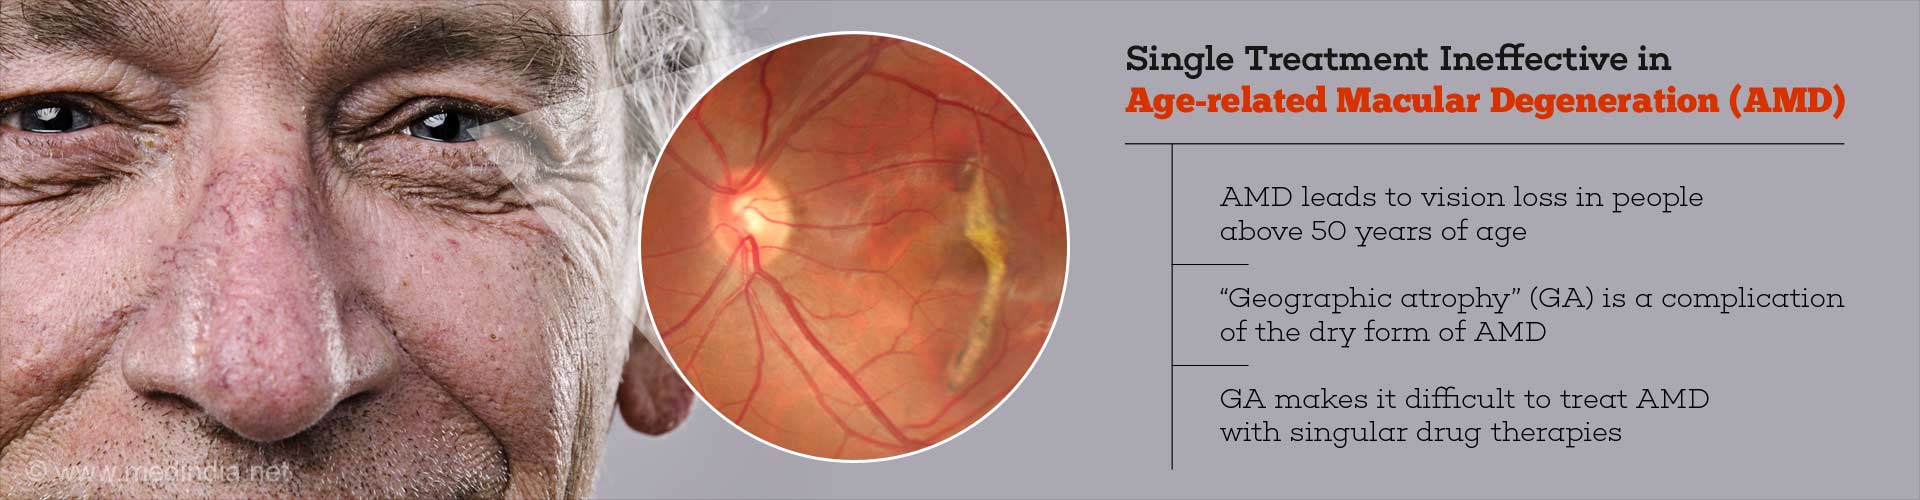 Single treatment ineffective in Age-related Macular Degeneration (AMD)
- AMD leads to vision loss in people above 50 years of age
- 